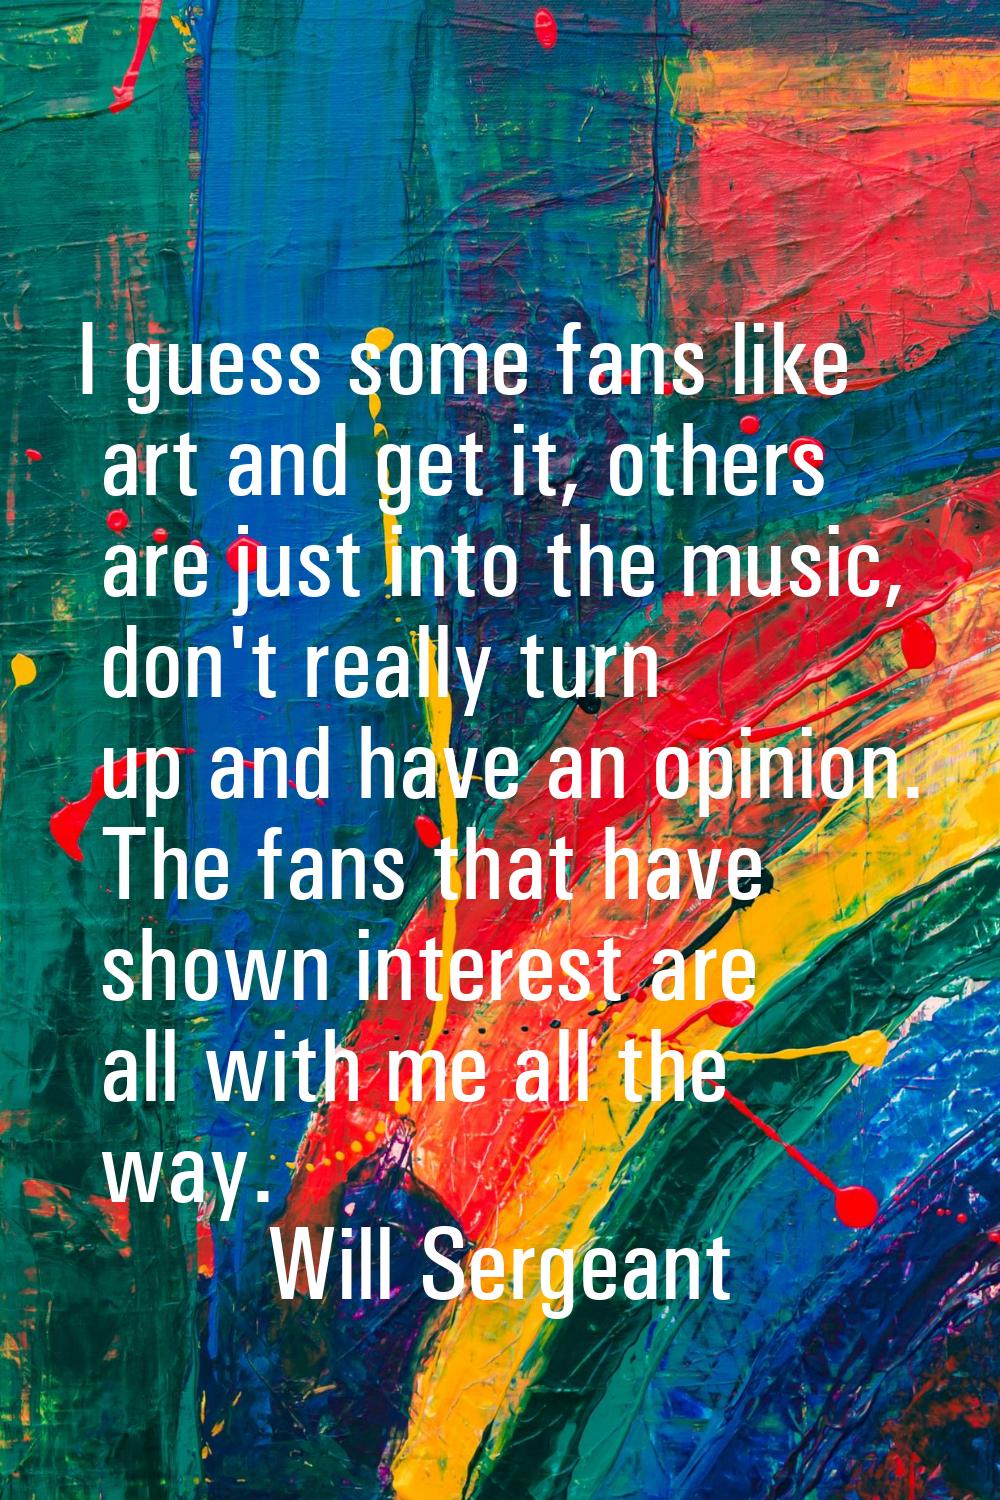 I guess some fans like art and get it, others are just into the music, don't really turn up and hav